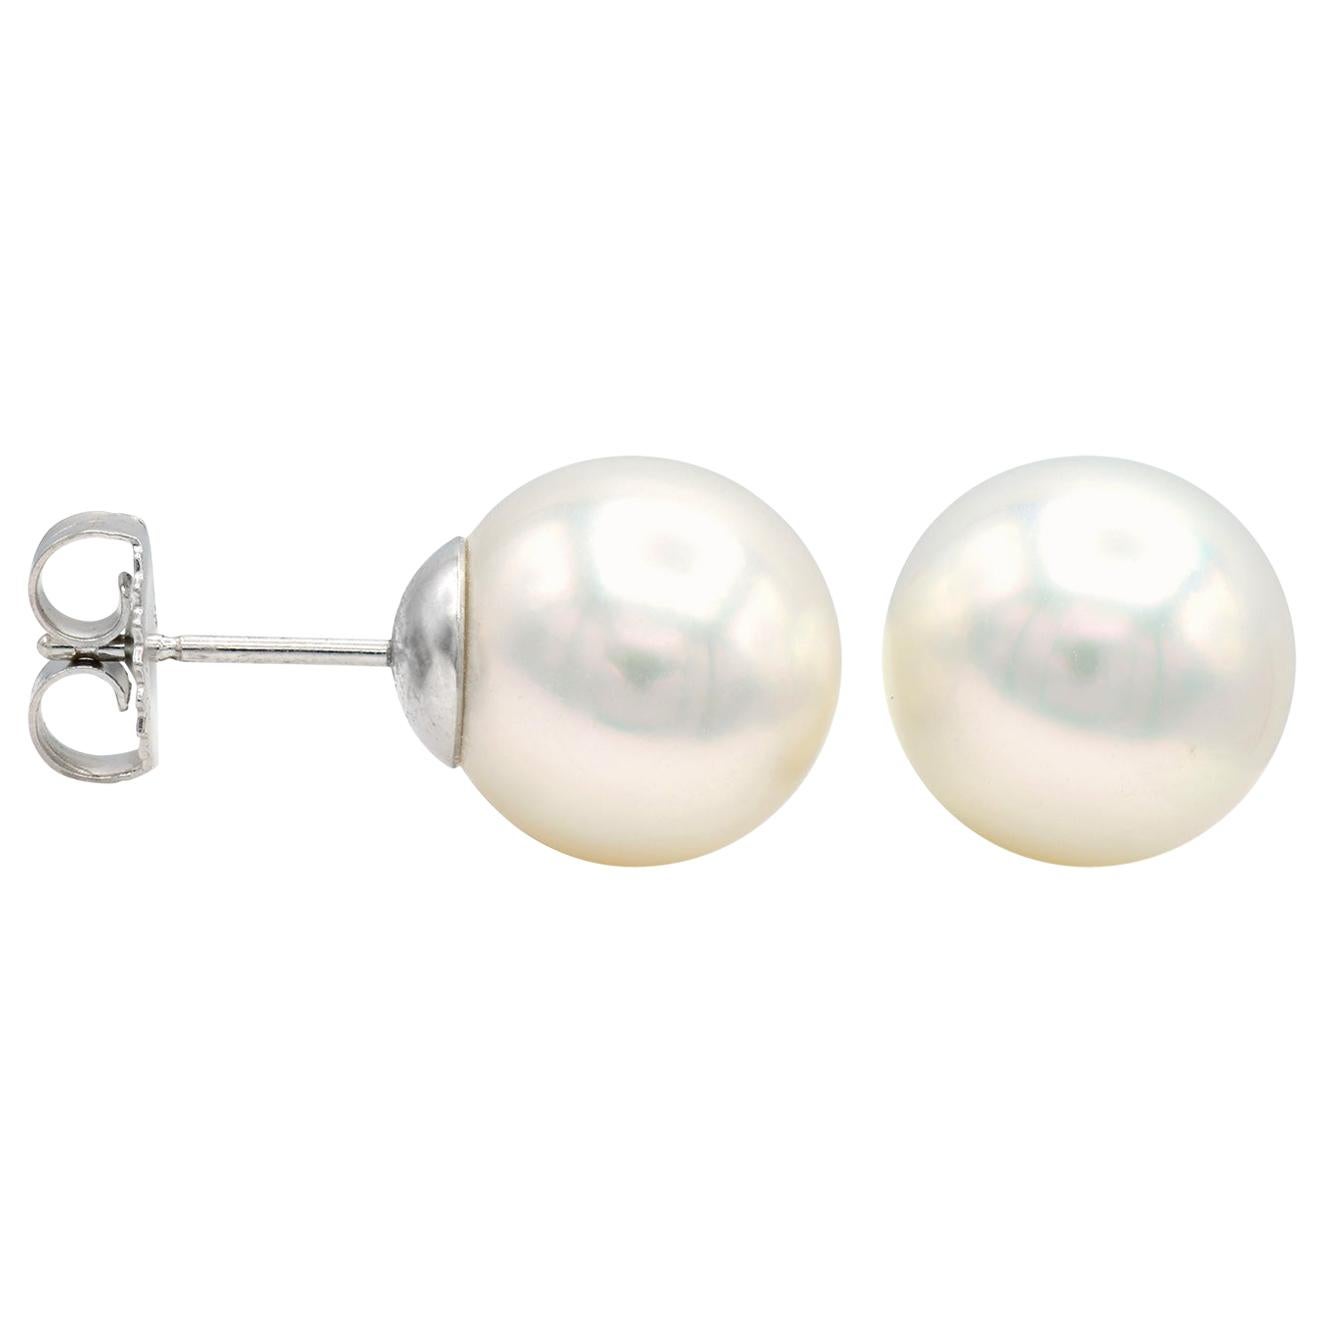 11.5-12mm South Sea Pearl Stud Earrings with 14 Karat White Gold Posts and Backs